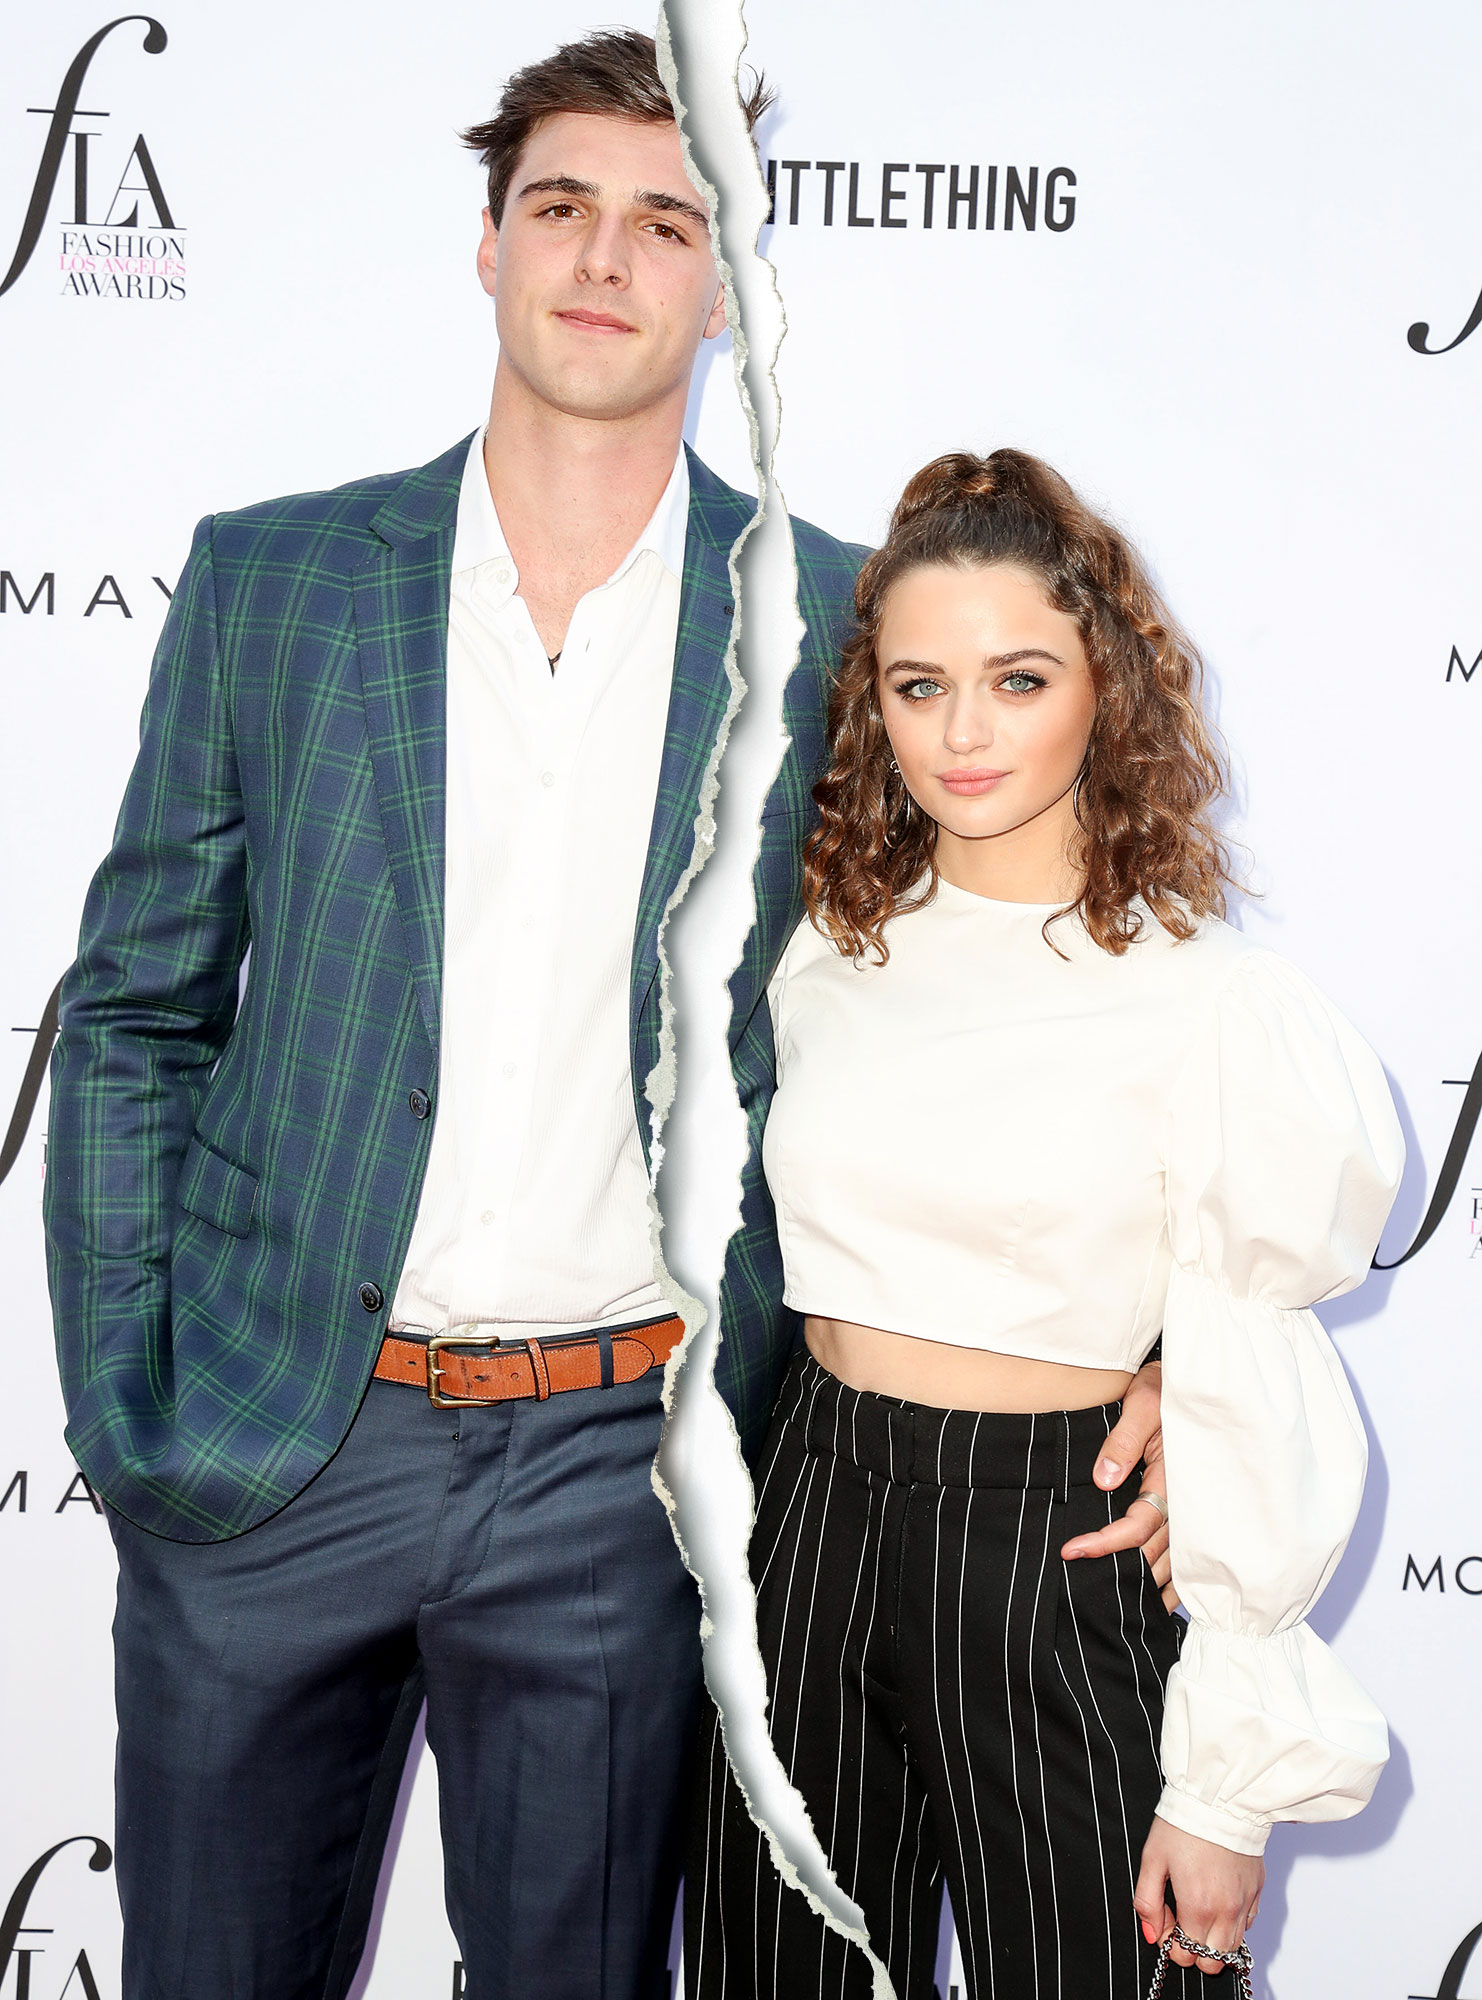 Joey King and Jacob Elordi: The Way They Were